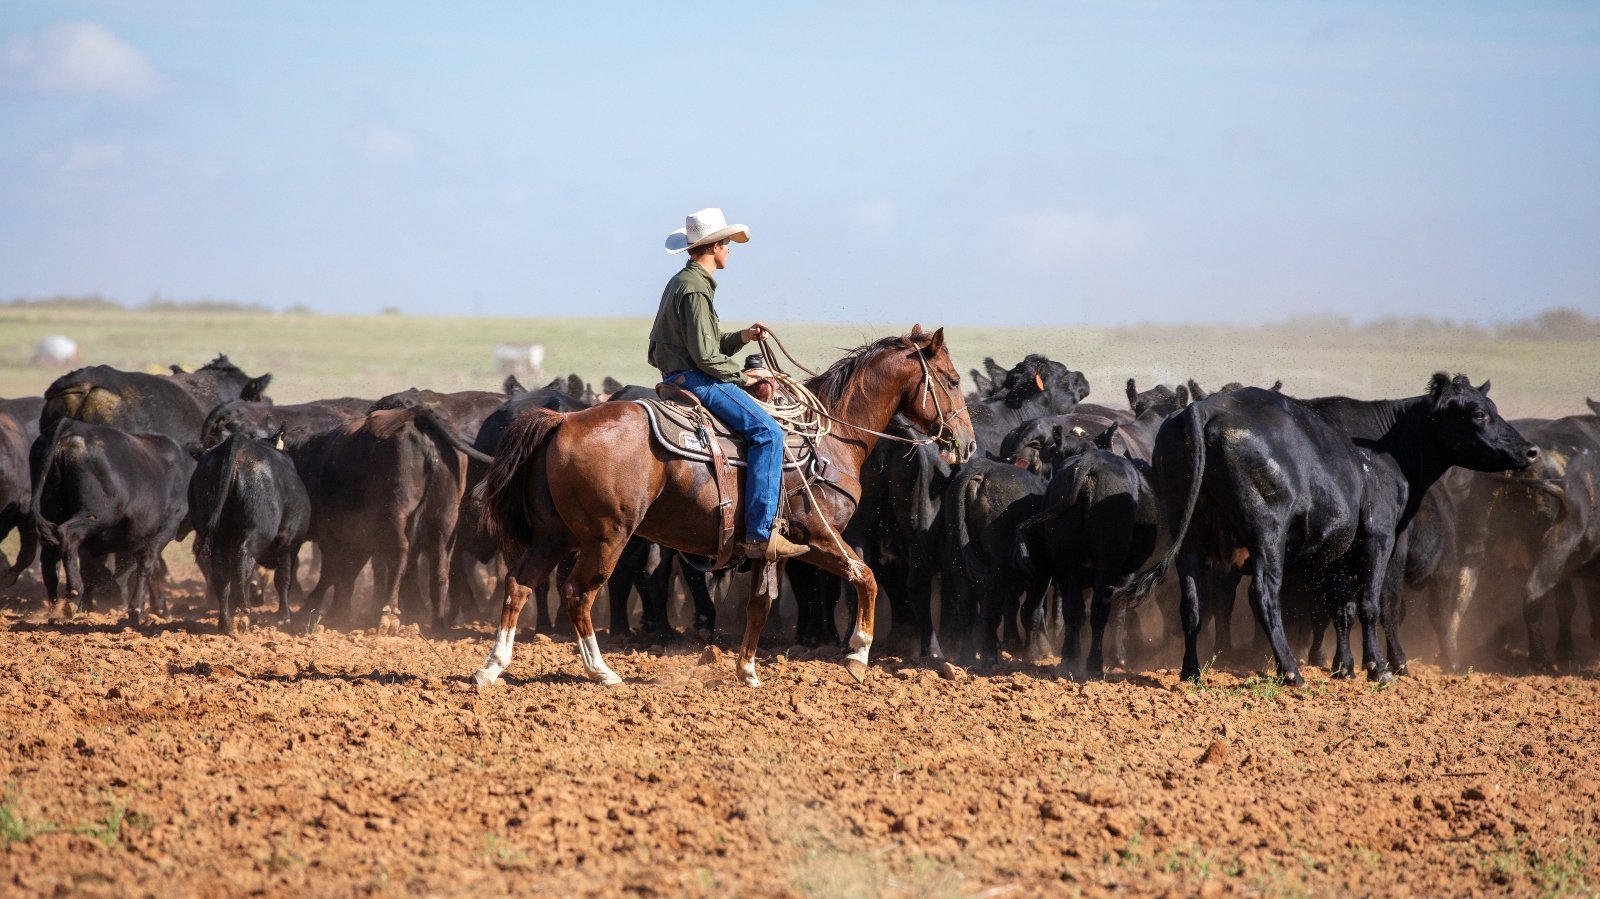 Cowboy rounding up cattle in Texas